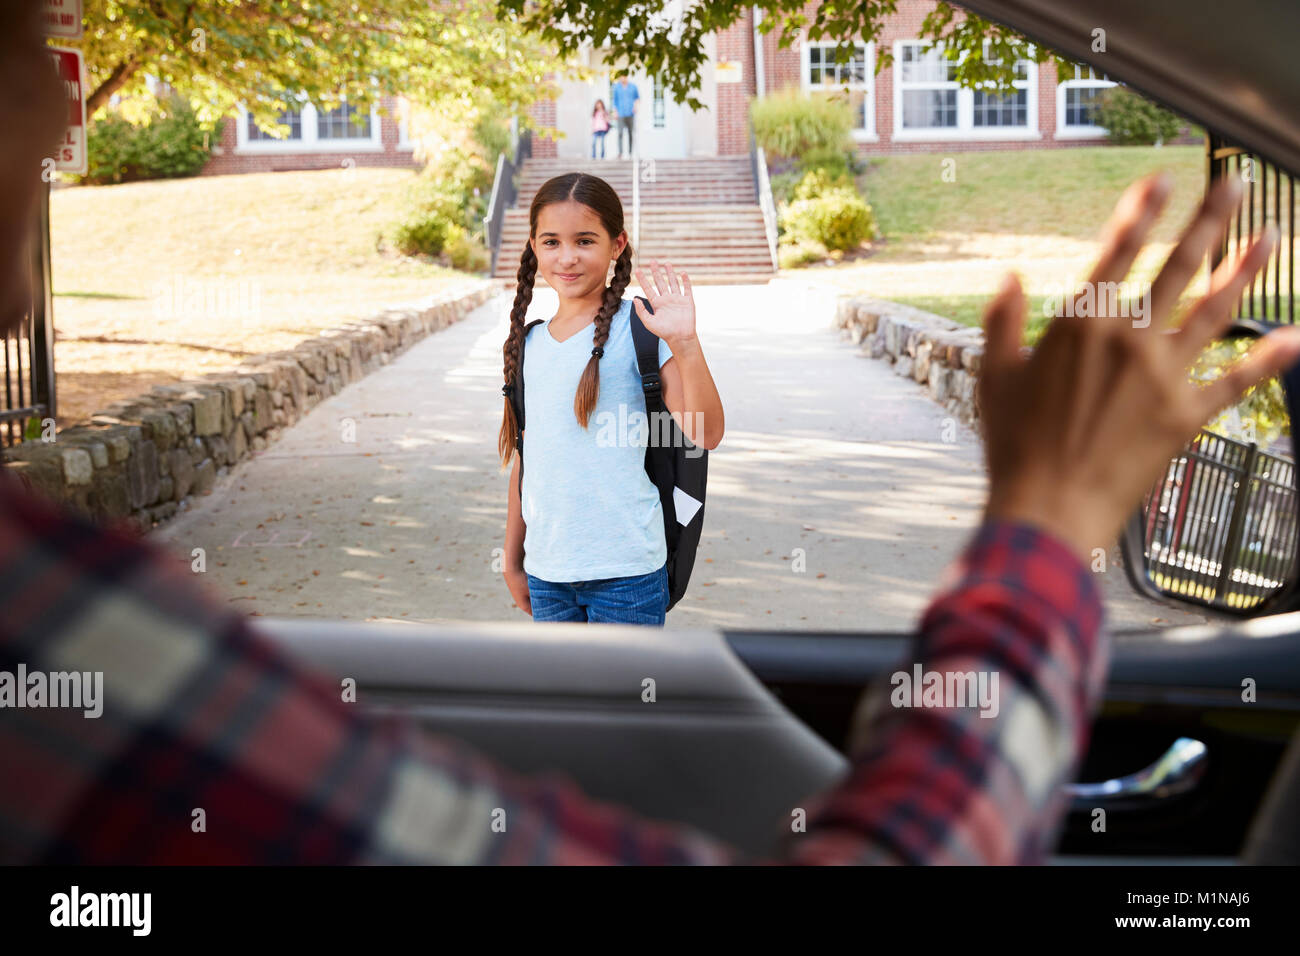 Mother In Car Dropping Off Daughter In Front Of School Gates Stock Photo